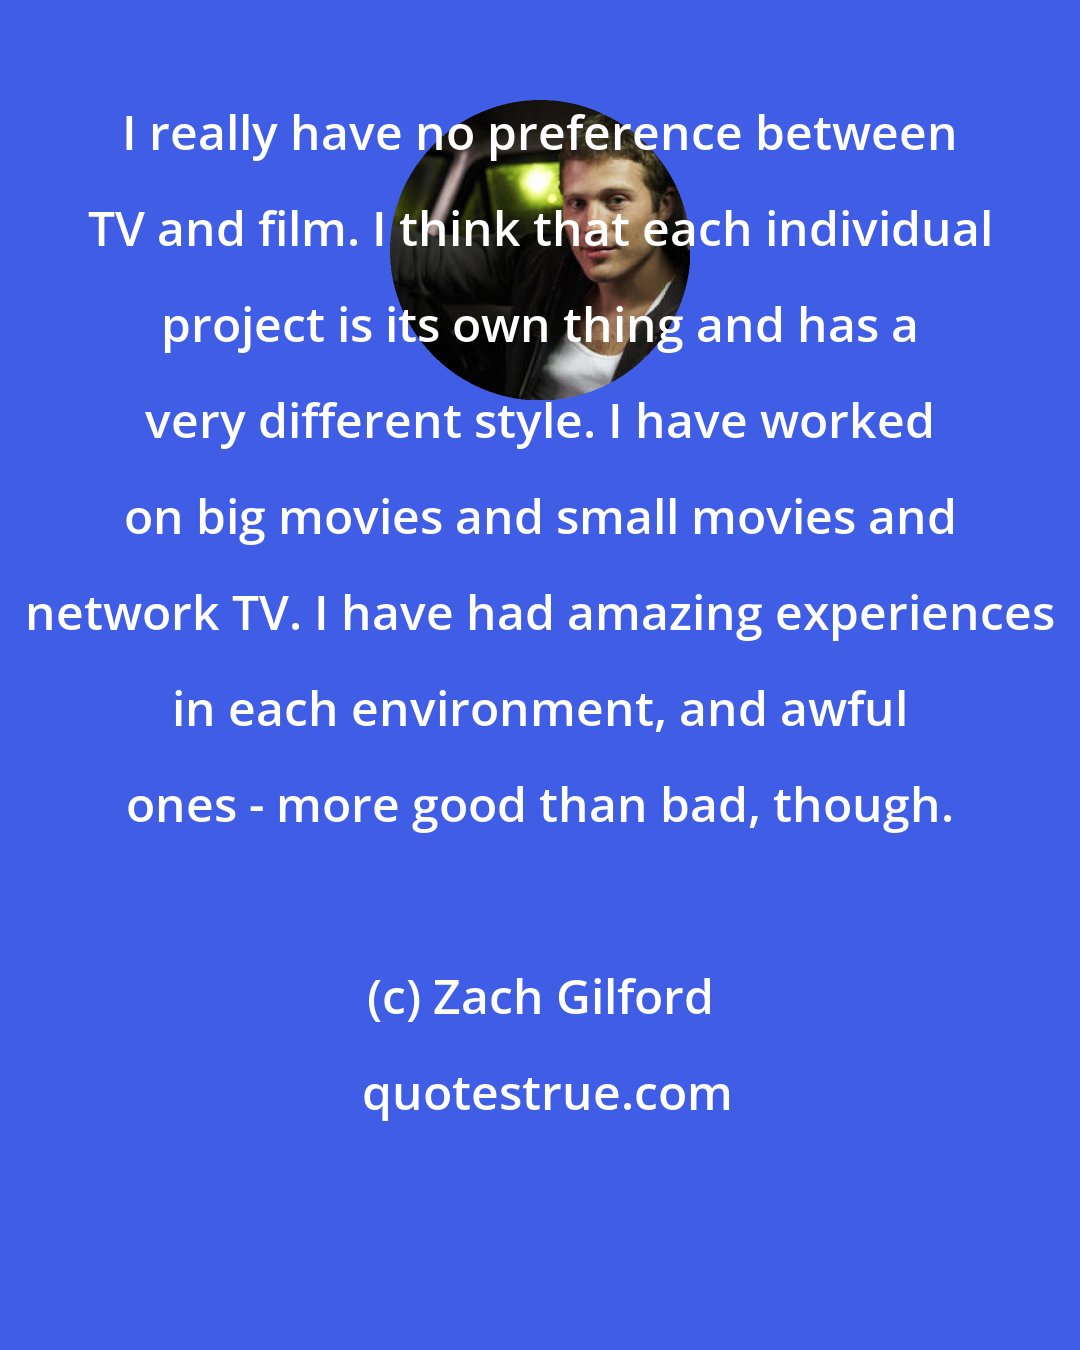 Zach Gilford: I really have no preference between TV and film. I think that each individual project is its own thing and has a very different style. I have worked on big movies and small movies and network TV. I have had amazing experiences in each environment, and awful ones - more good than bad, though.